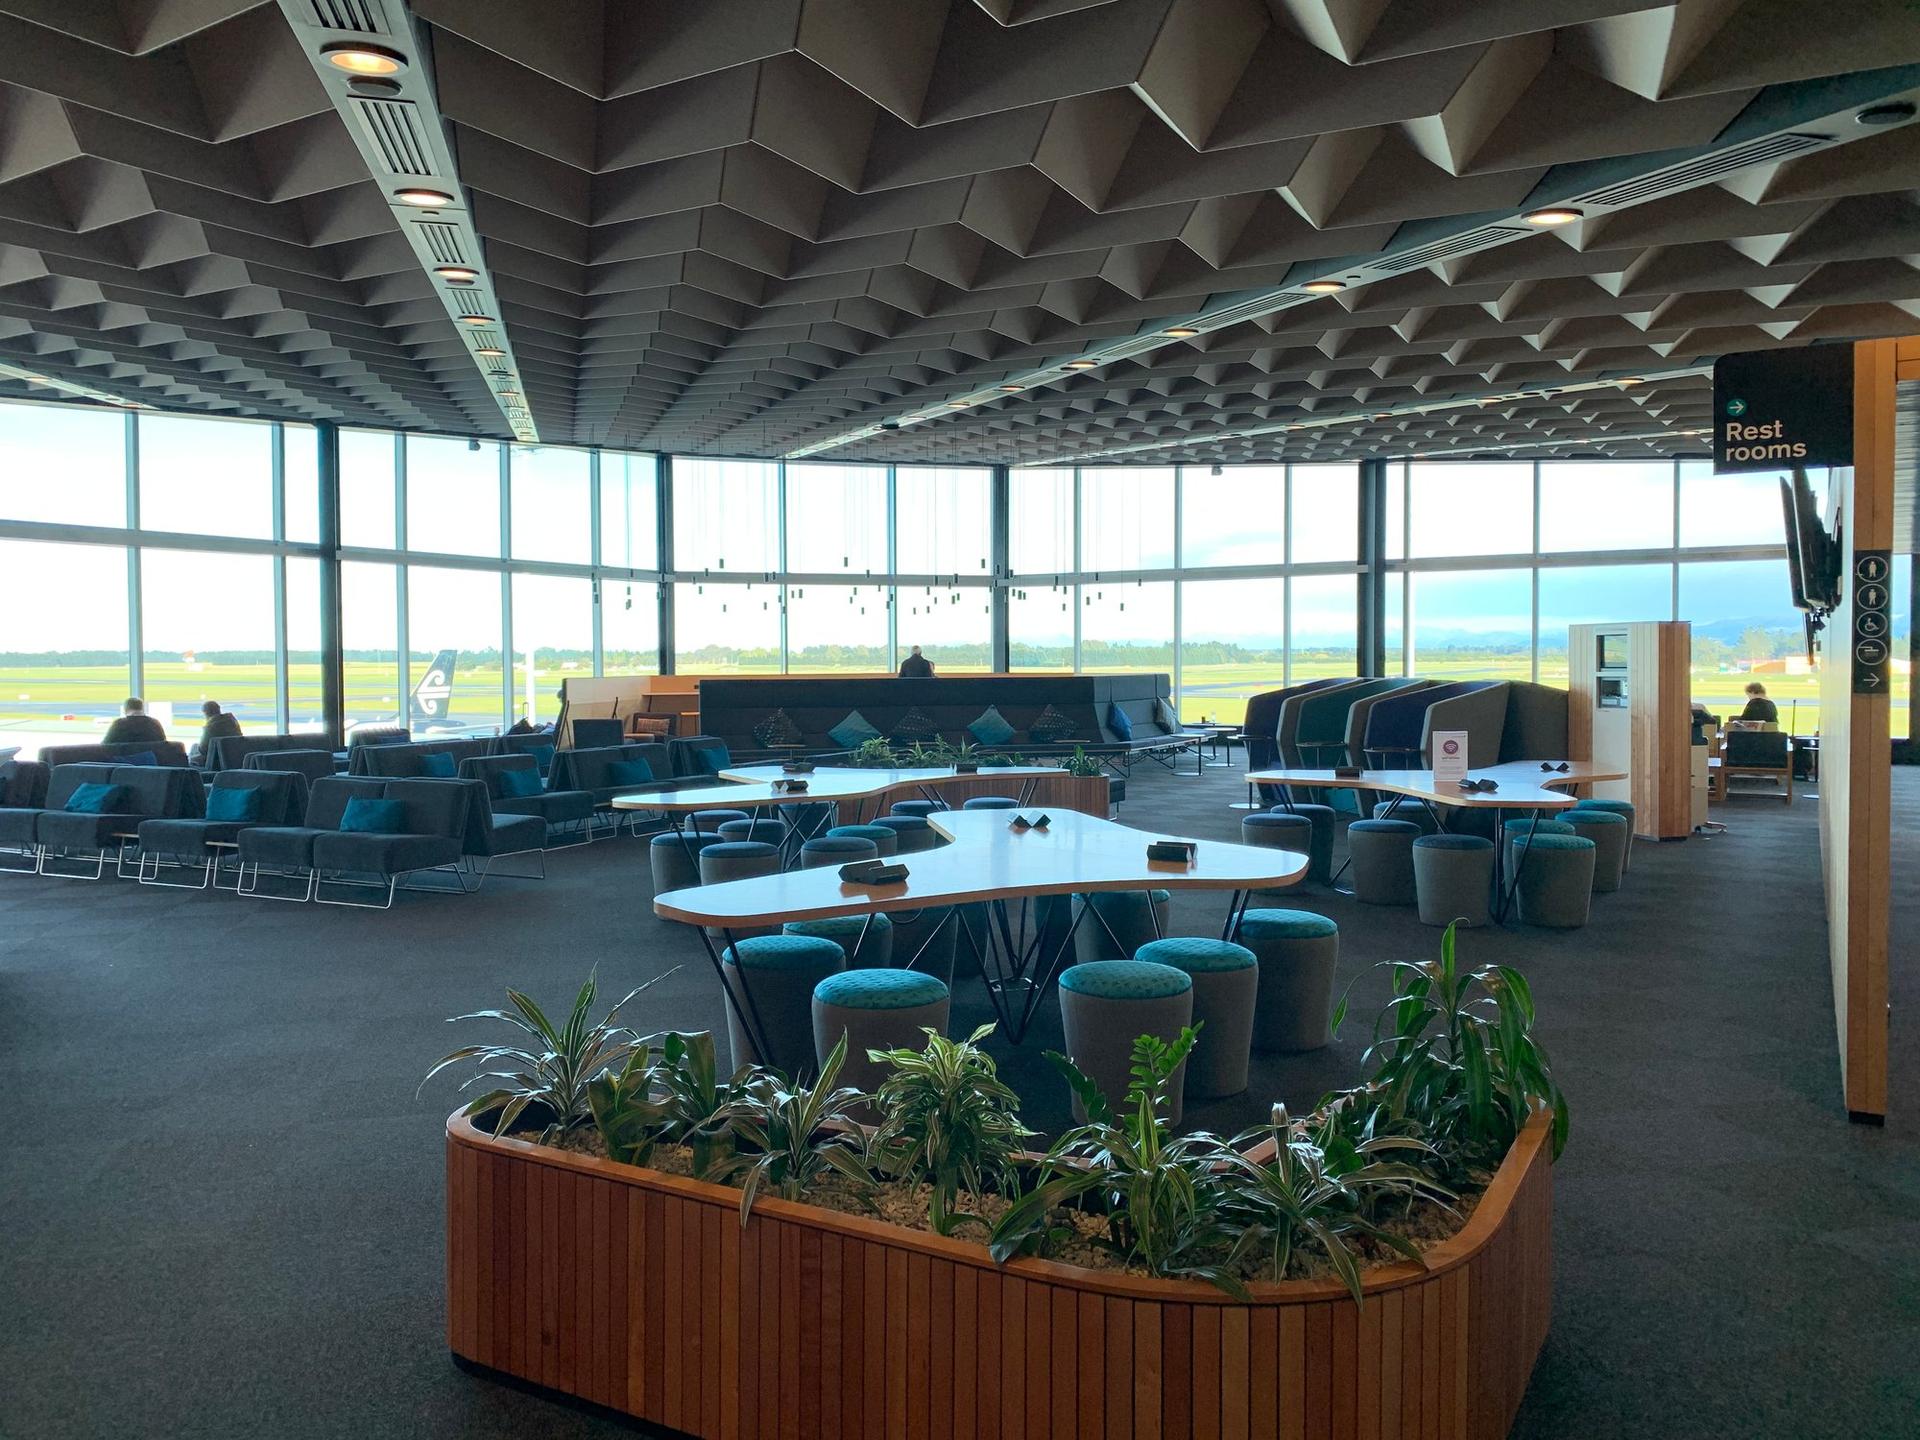 Air New Zealand Domestic Lounge image 1 of 6